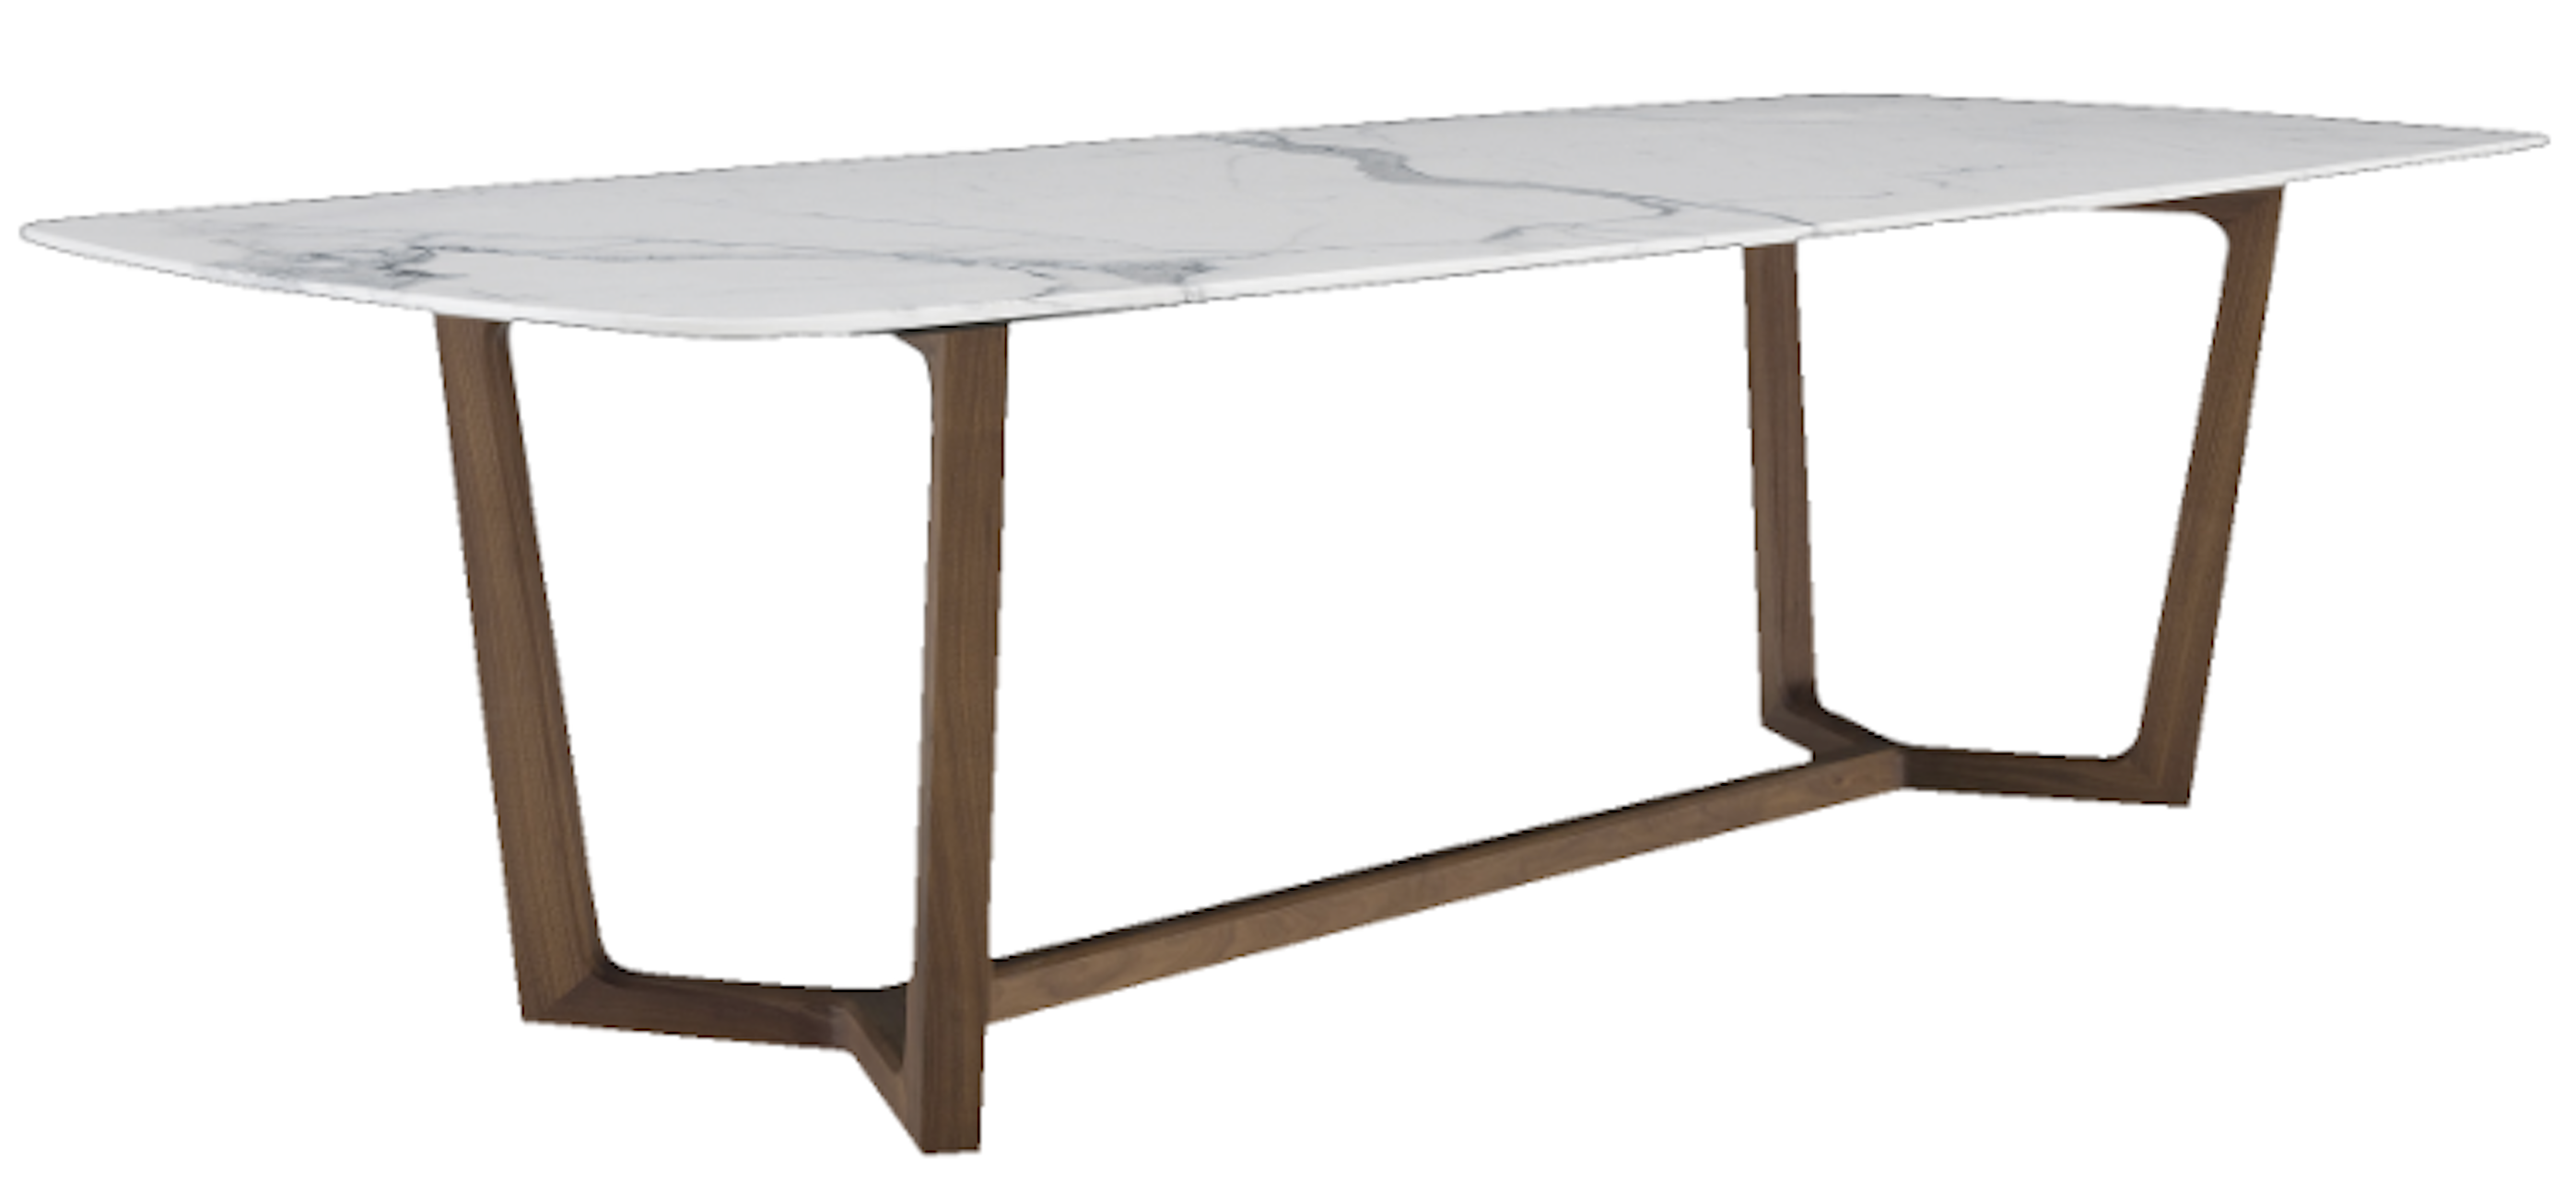 Product Image Concorde Dining Table